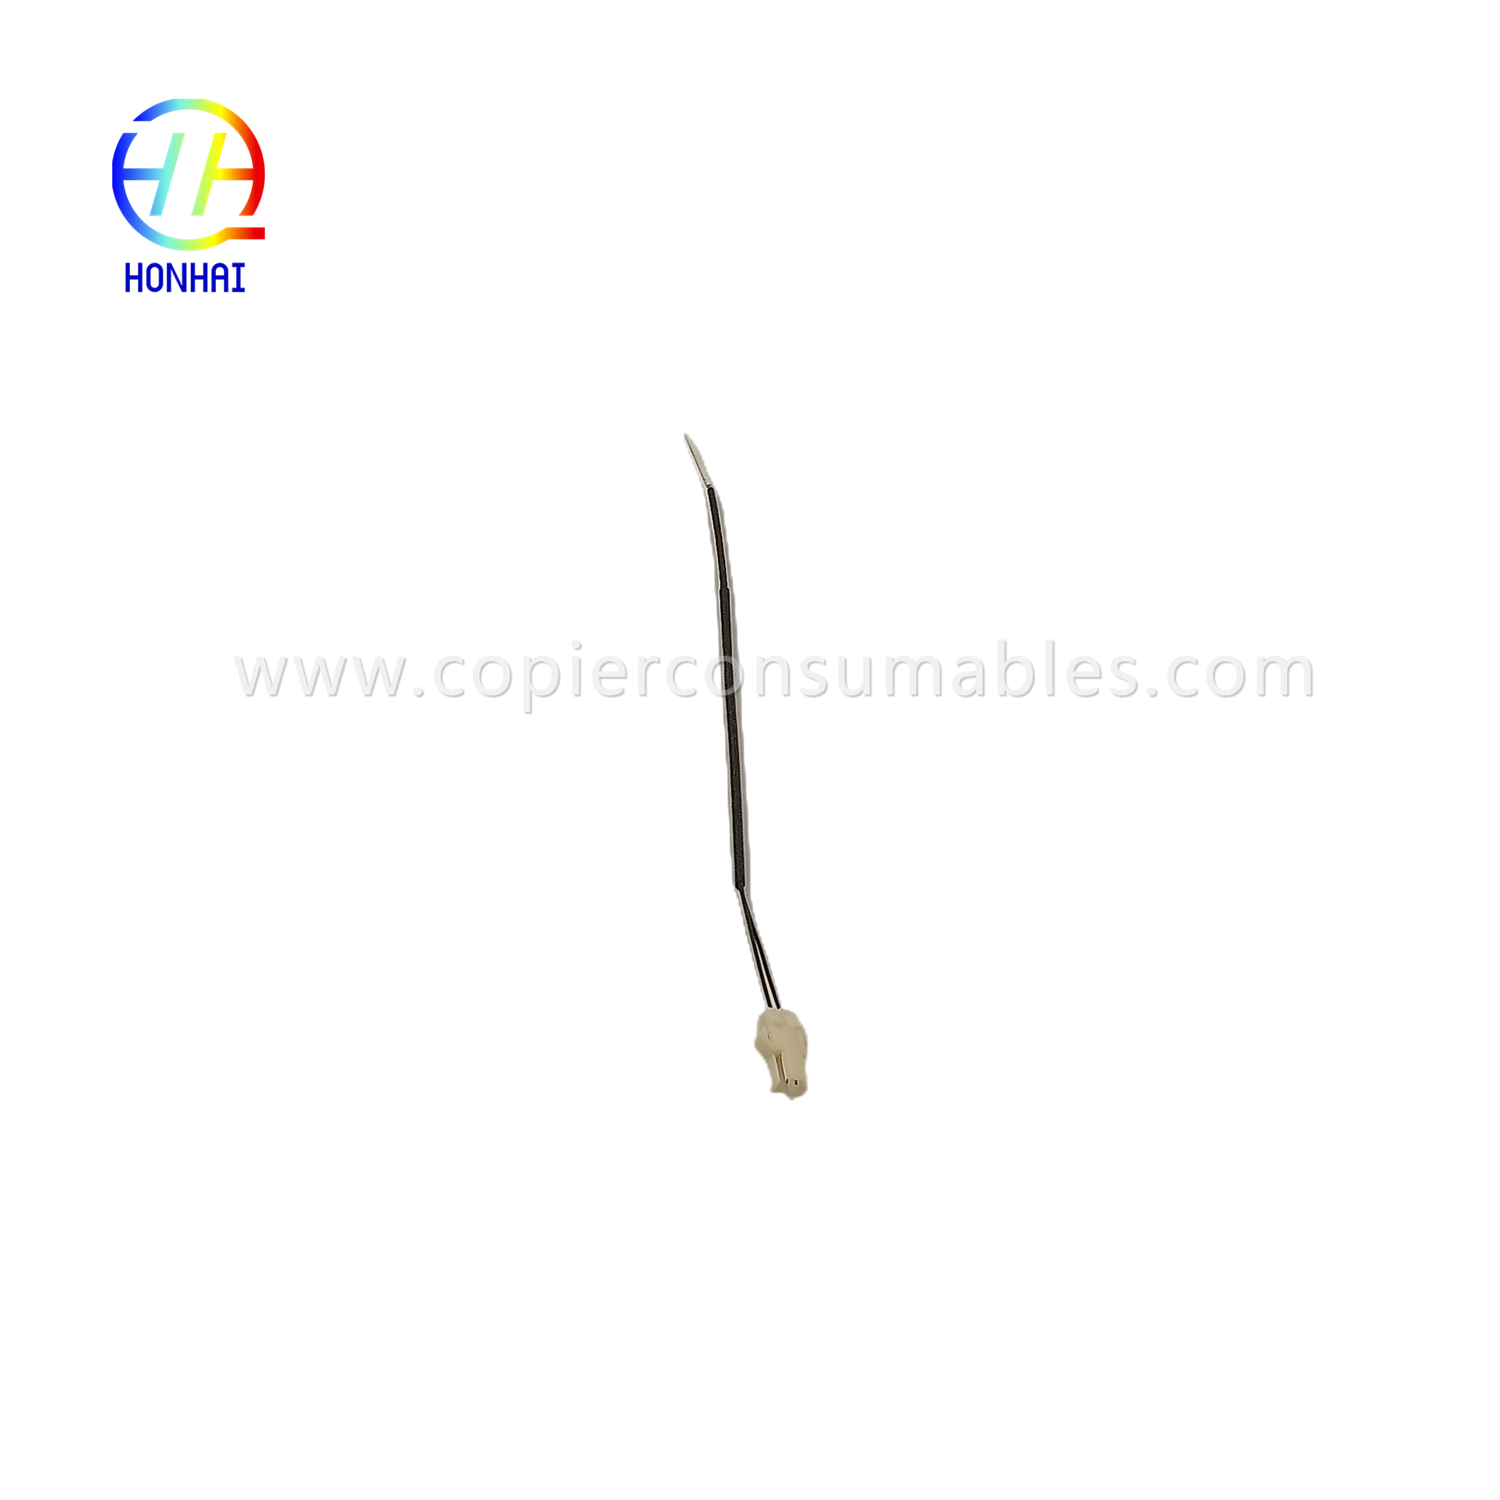 Fuser Thermistor mo OCE 9400 TDS300 TDS750PW300350 (4)